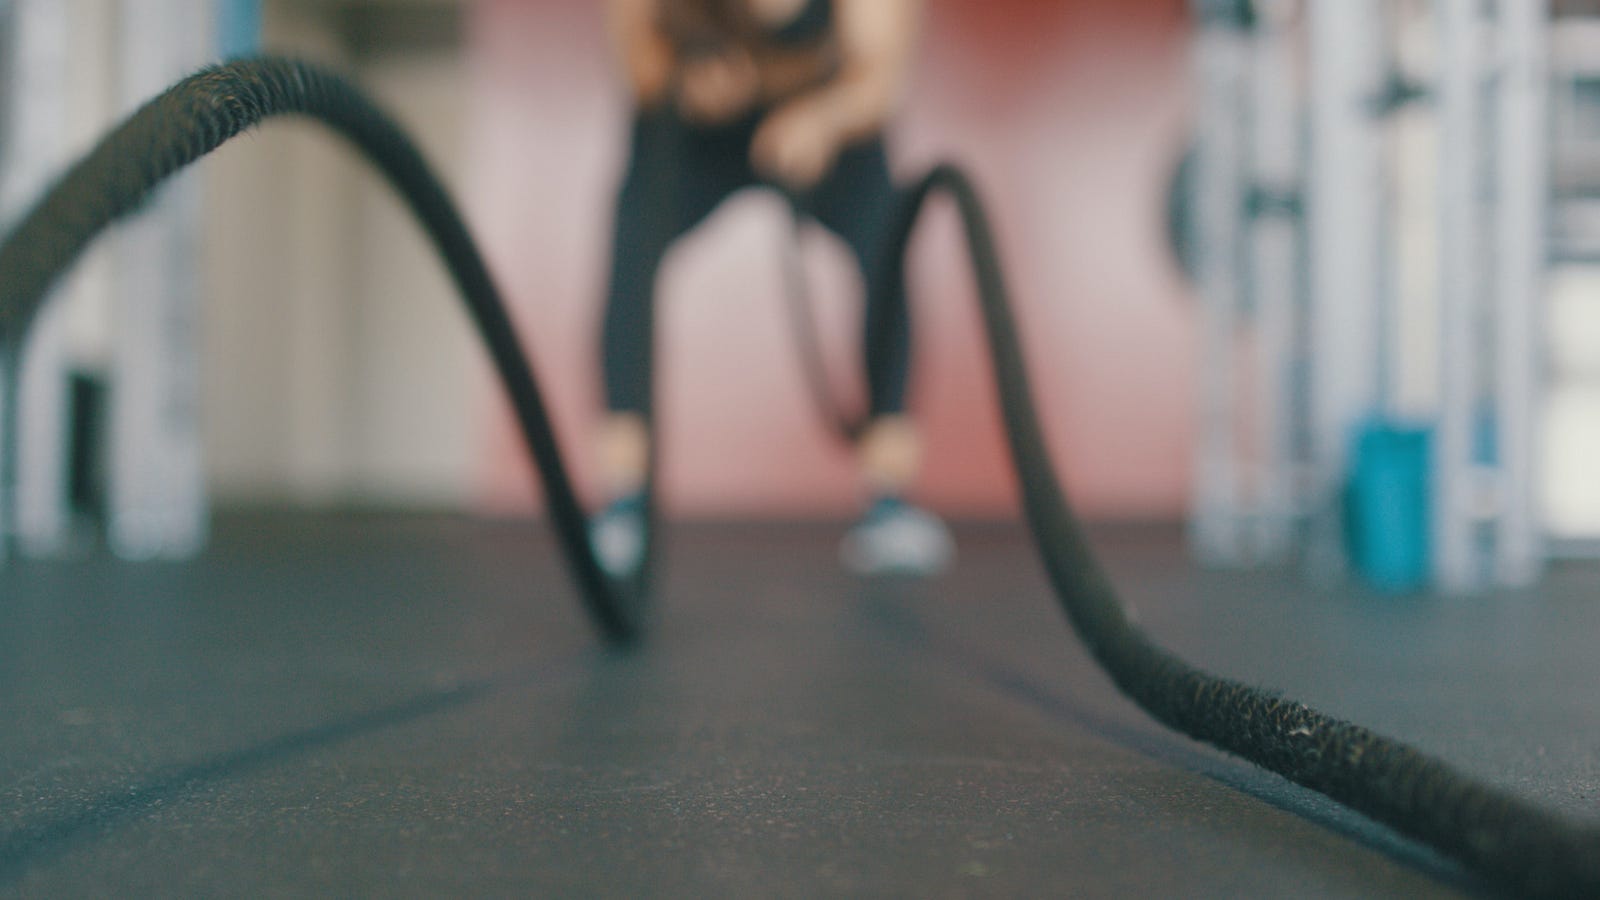 A blurred person in the distance works with black ropes, one in each hand. HIIT has emerged as a scientifically supported method to enhance fitness levels and promote weight loss efficiently.